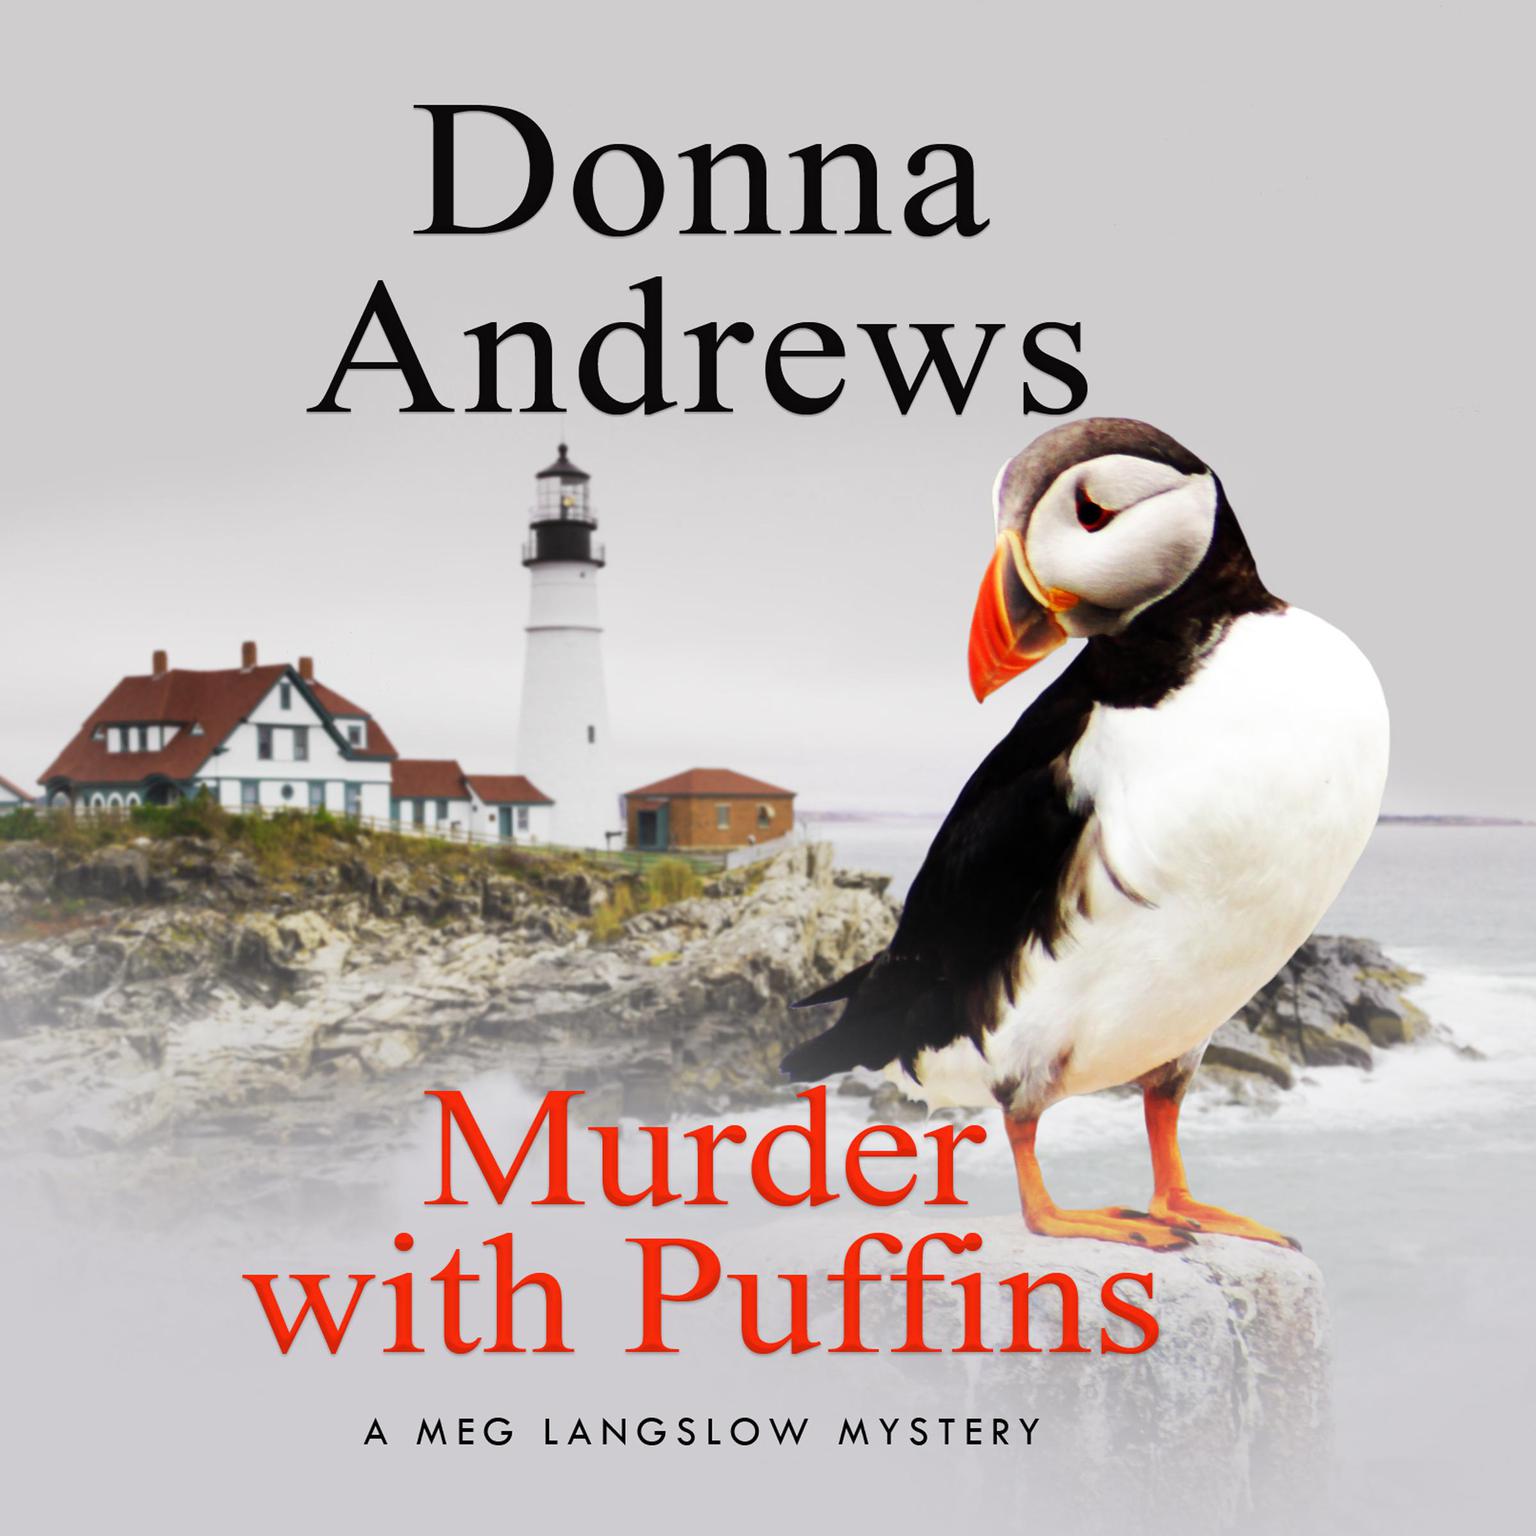 Murder with Puffins Audiobook, by Donna Andrews